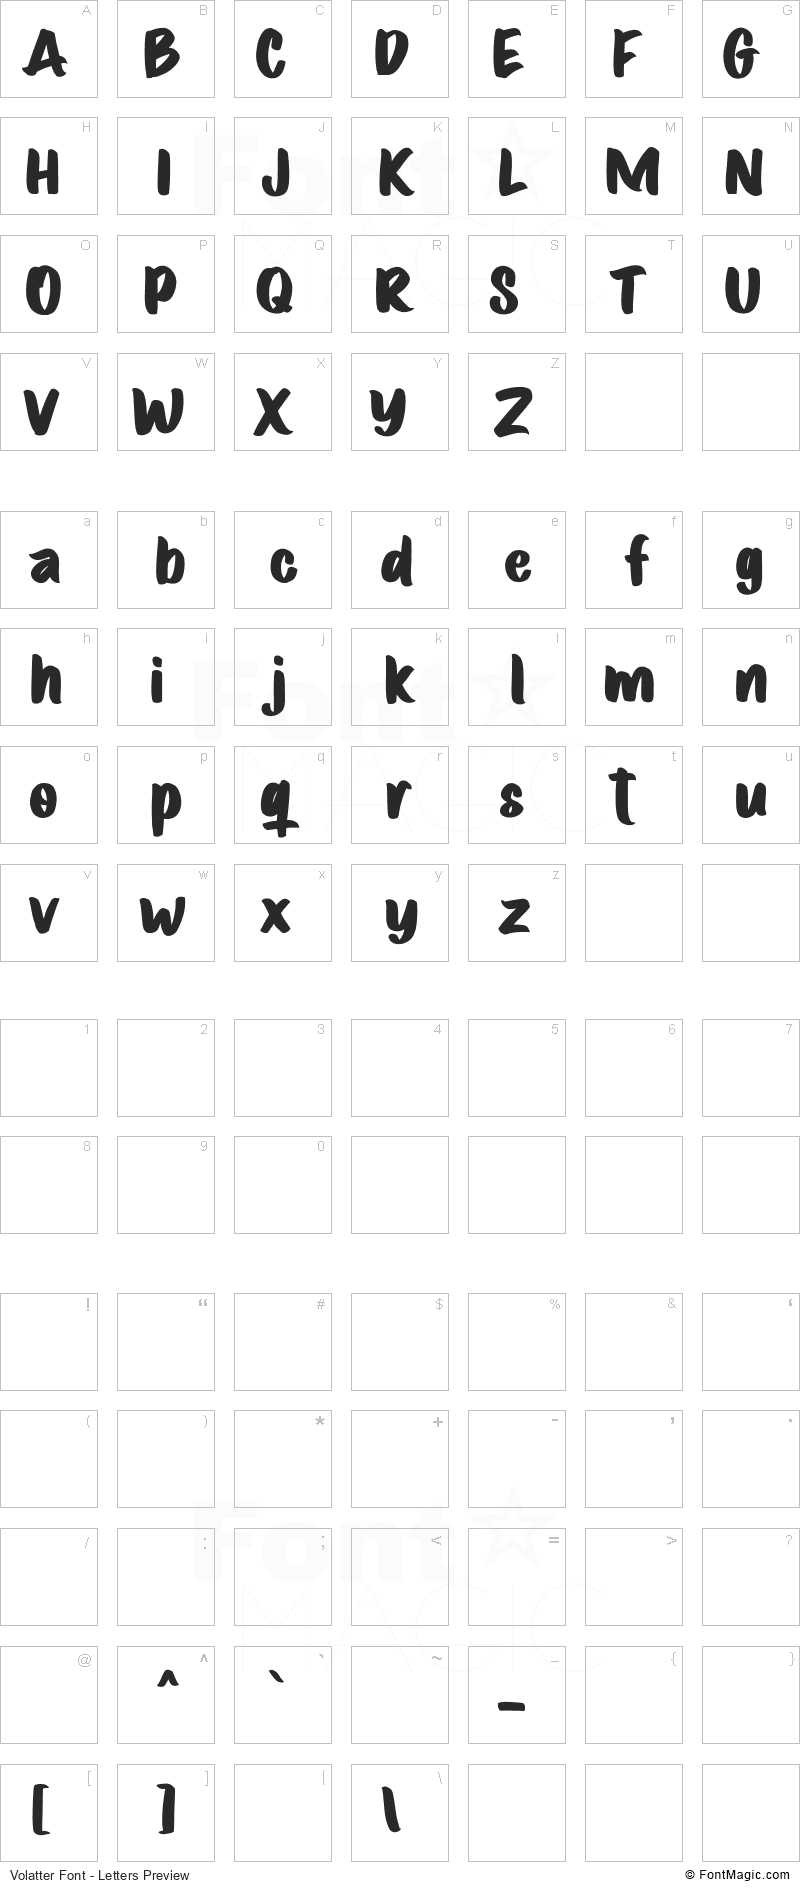 Volatter Font - All Latters Preview Chart